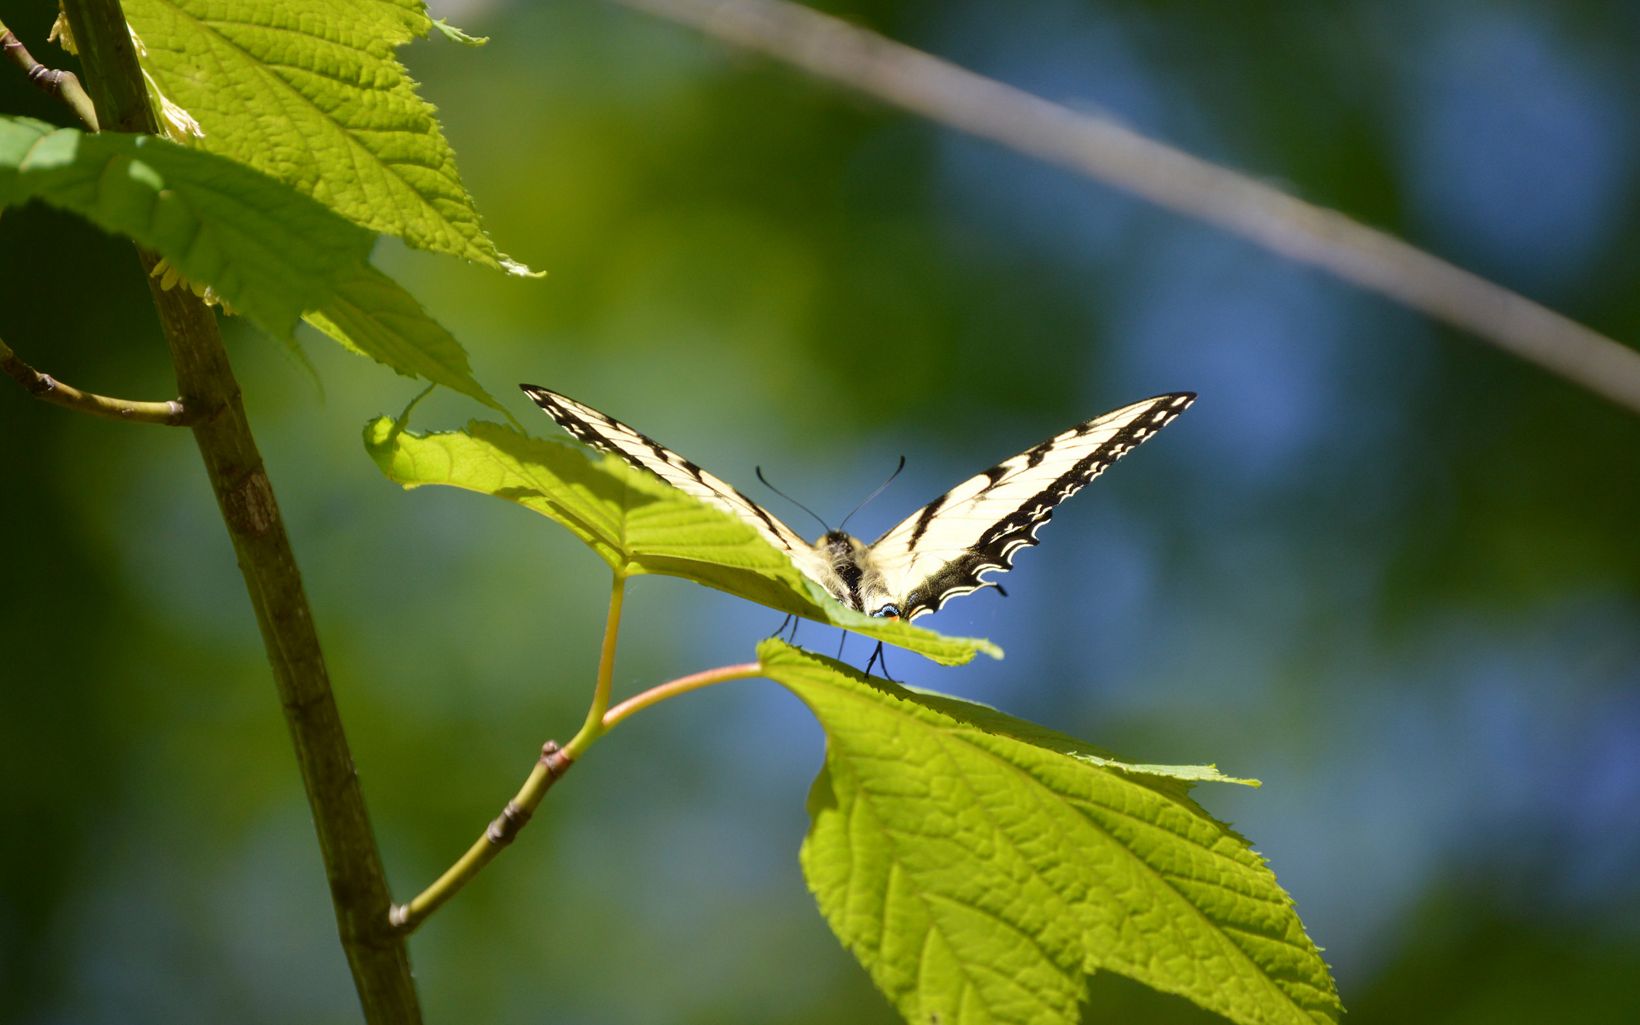 A yellow and black Eastern tiger butterfly spreads its wings and perches on a delicate green leaf.